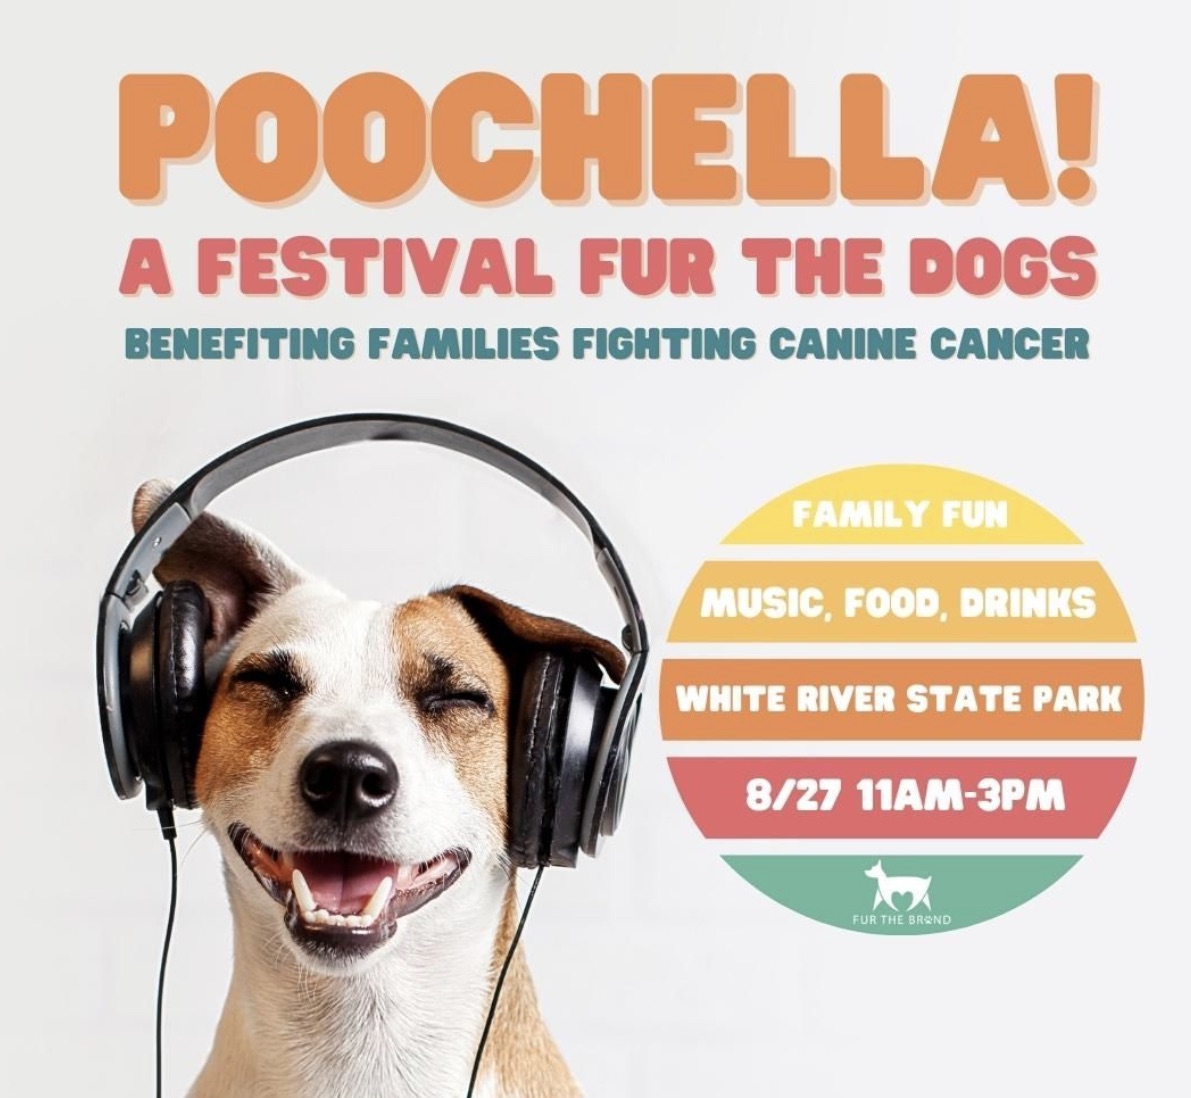 Poochella Festival graphic featuring a dog wearing headphones